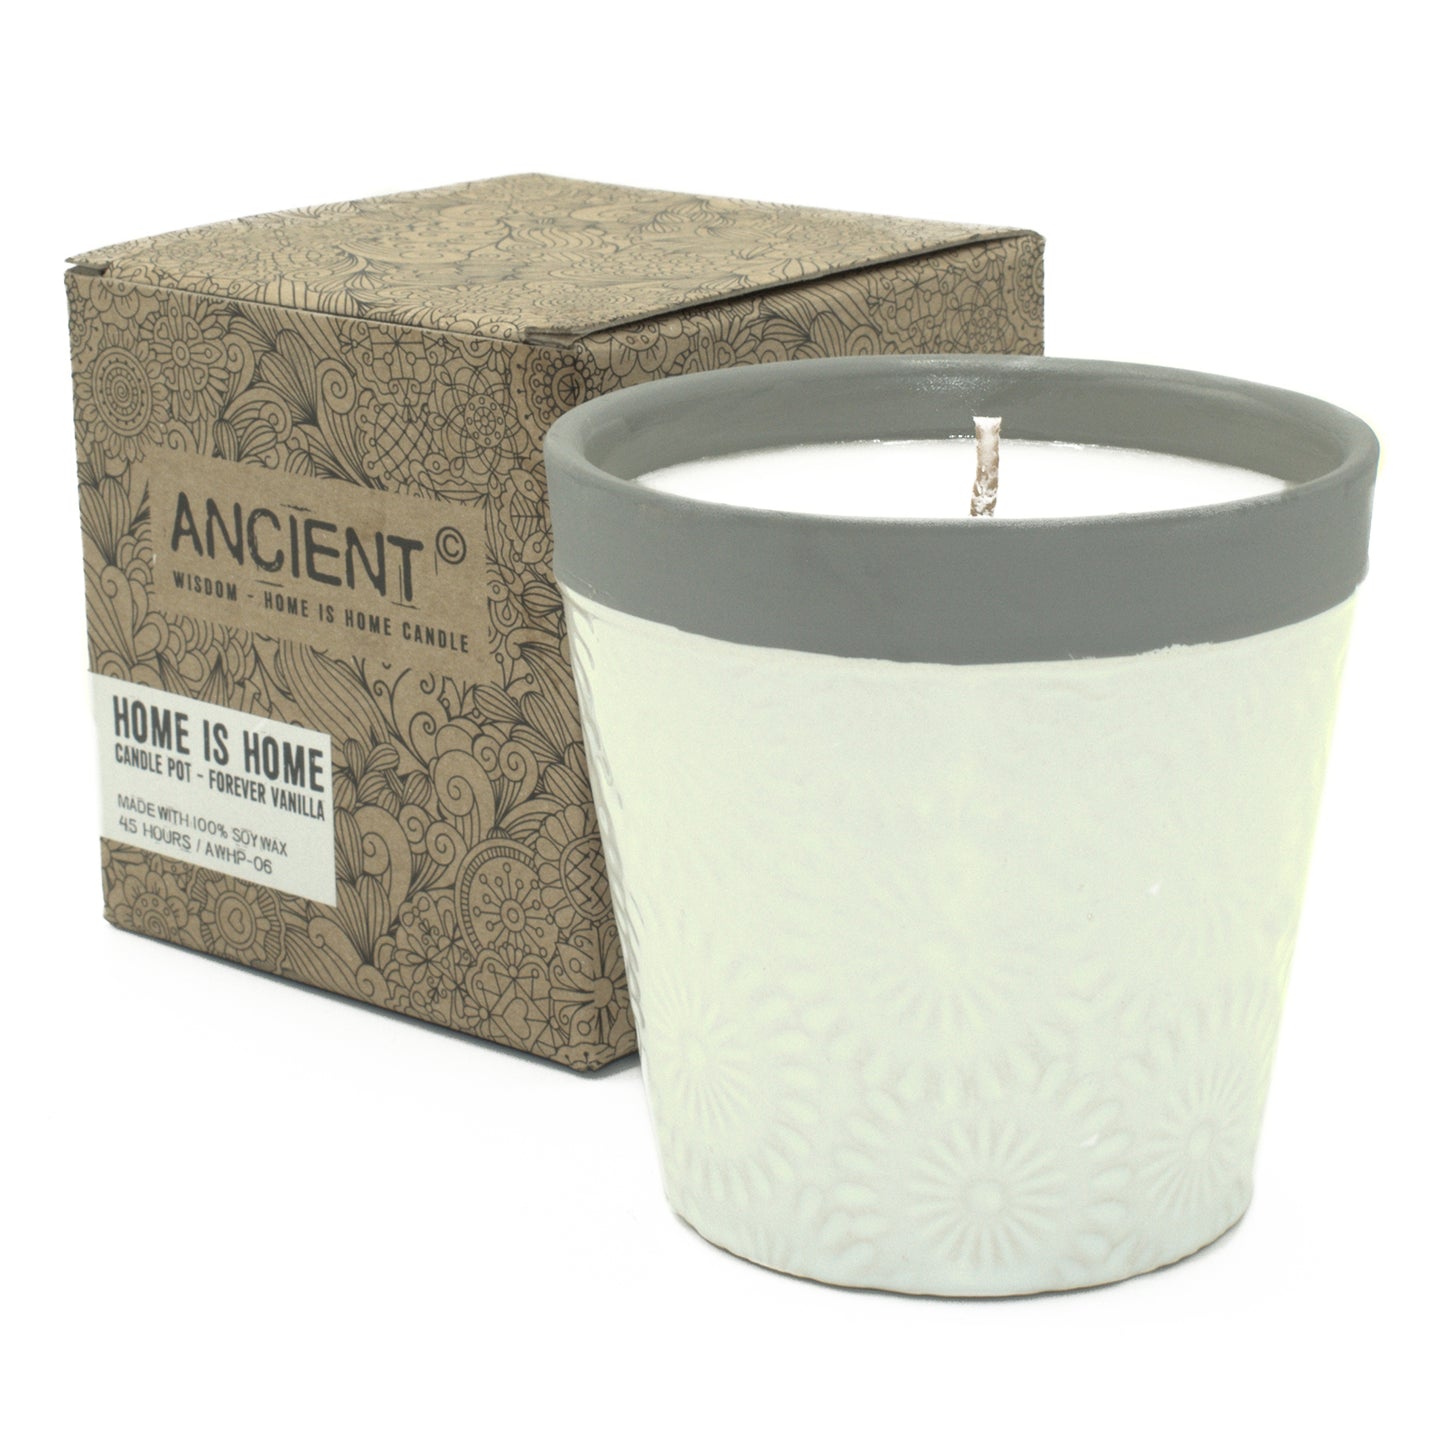 Home is Home Candle Pot - Forever Vanilla